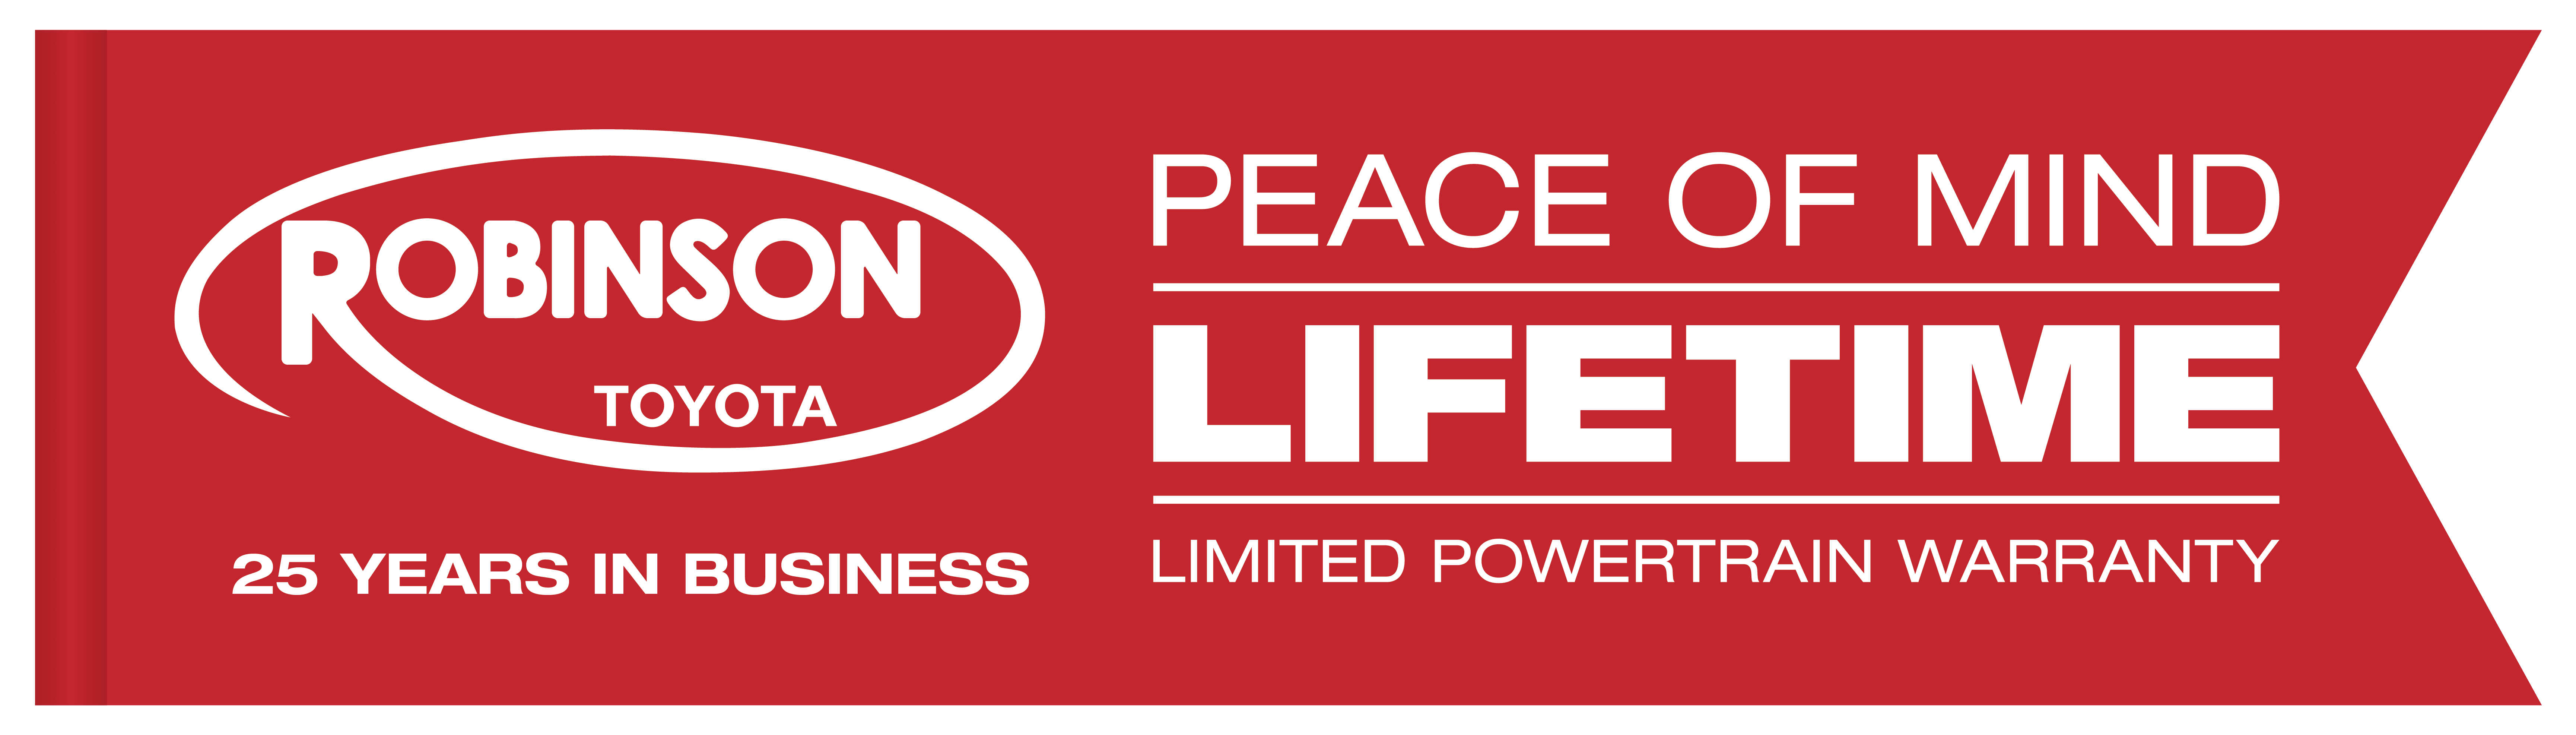 Peace of Mind with Robinson Toyota 